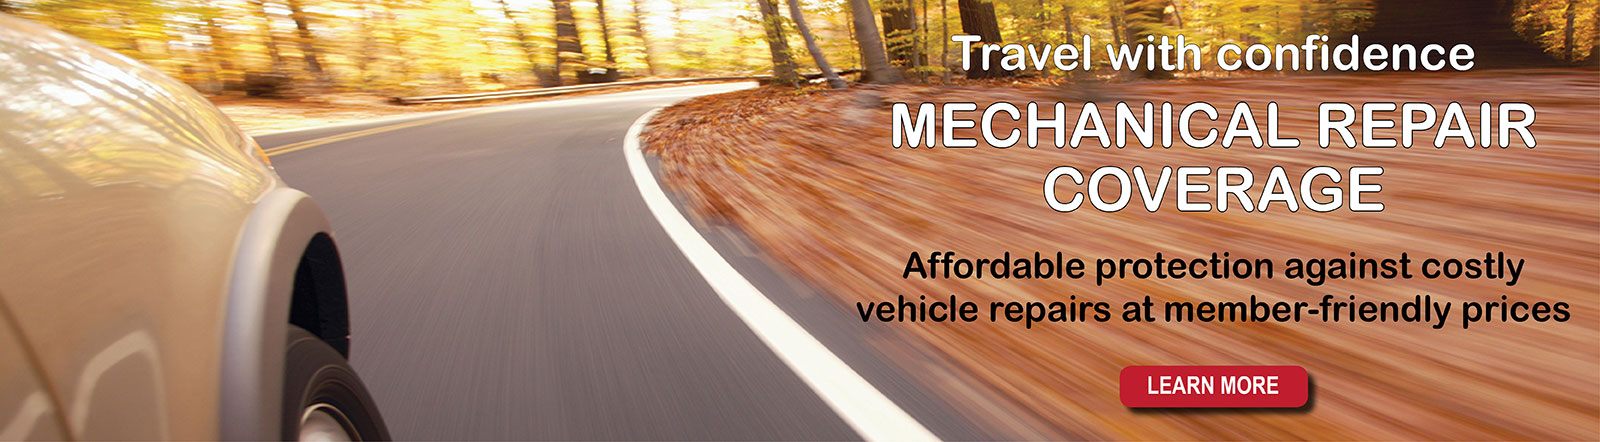 Travel with confidence with Mechanical Repair Coverage. It's affordable protection against costly vehicle repairs at member-friendly prices.